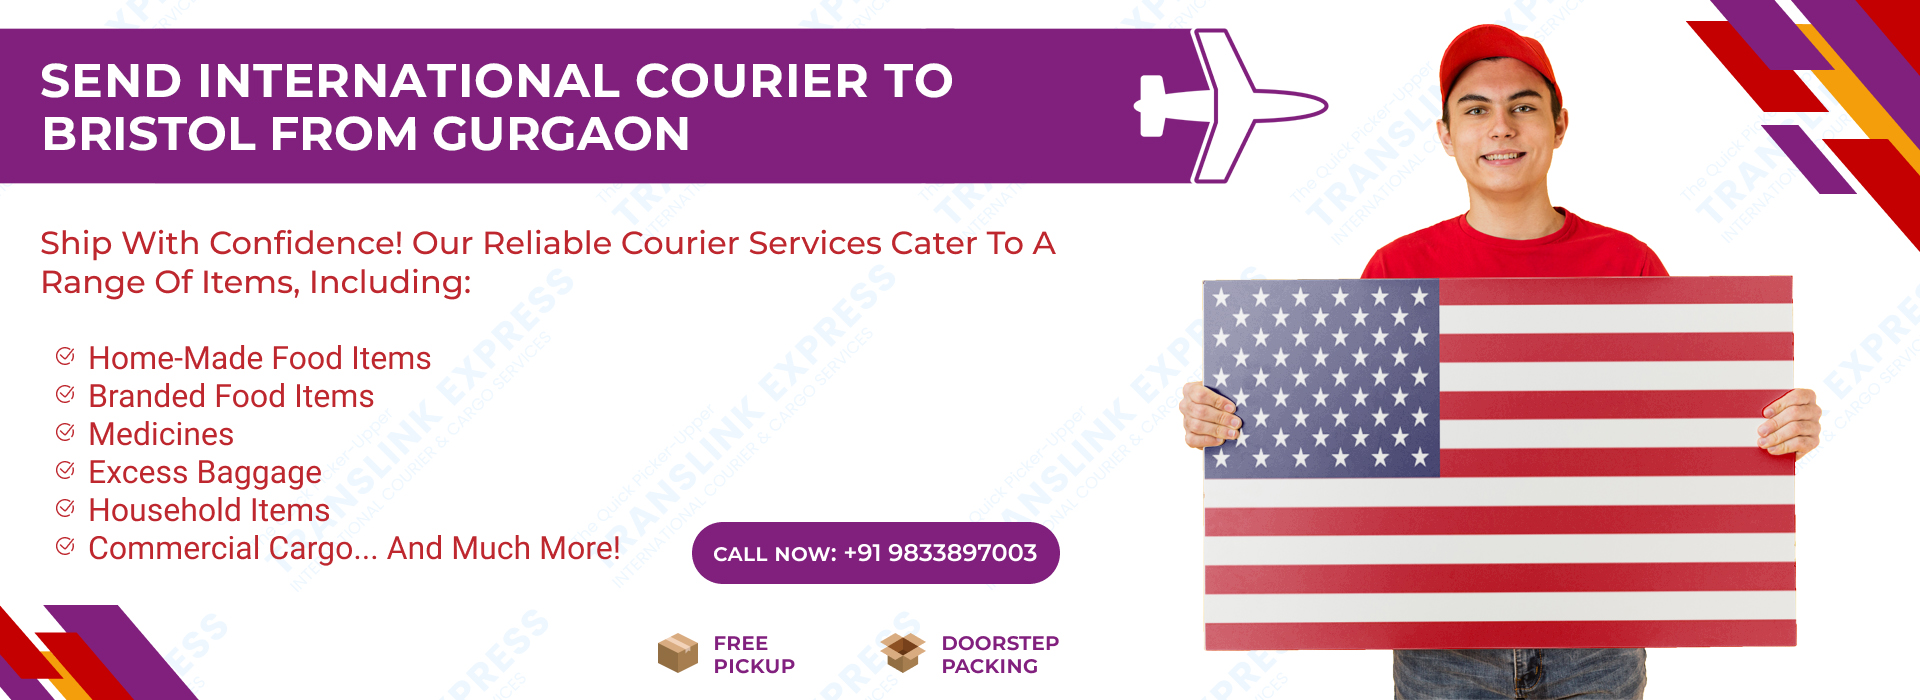 Courier to Bristol From Gurgaon